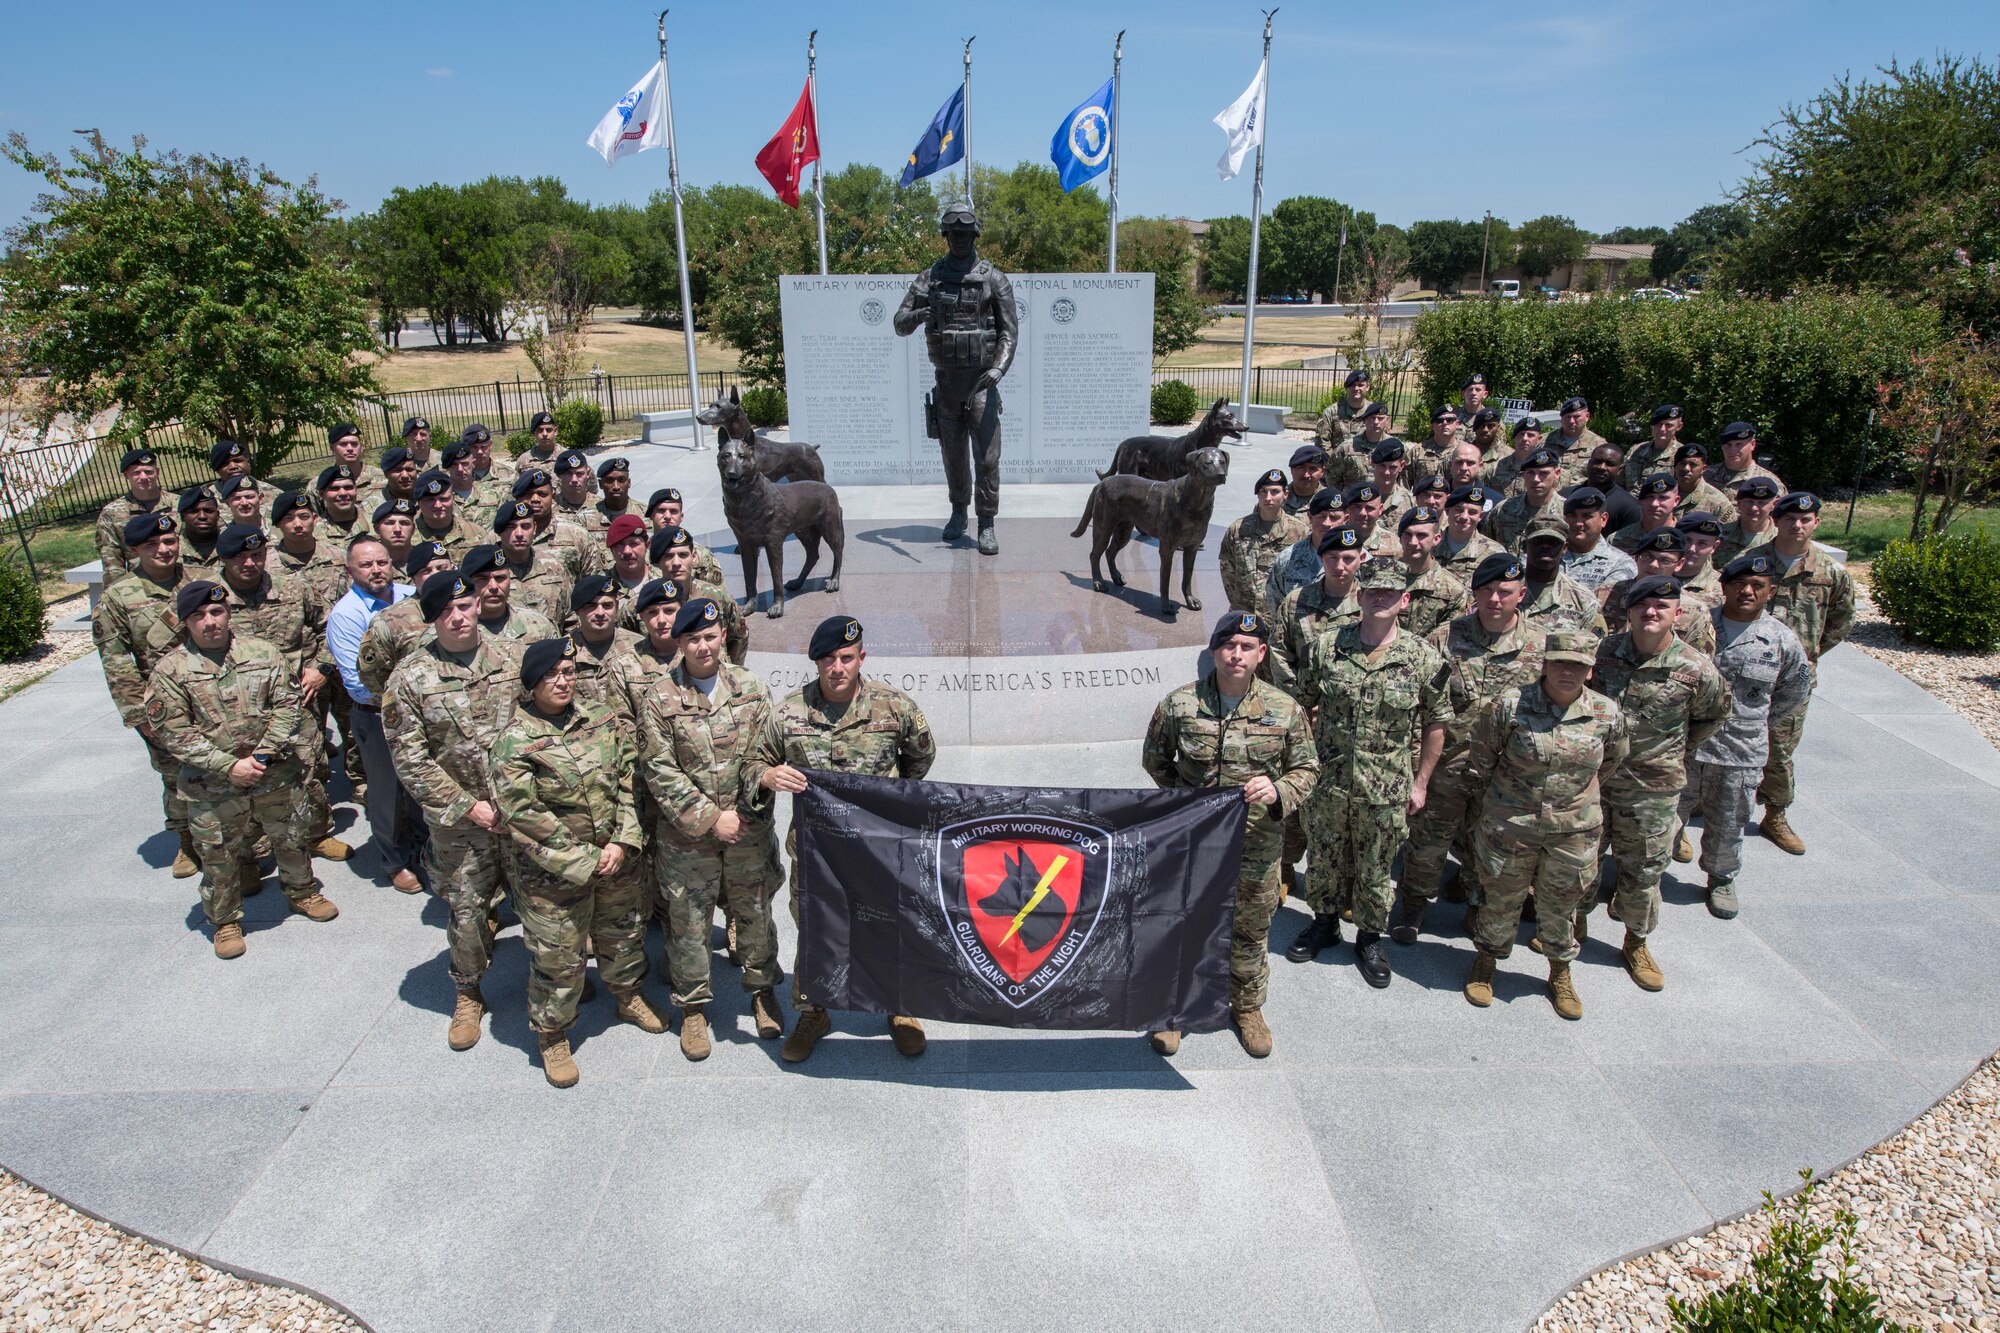 U.S. Air Force Security Forces Kennel Masters pose for a group photo in front of the Military Working Dog (MWD) monument Aug. 13, 2019, at Joint Base San Antonio-Lackland, Texas. The members gathered at Joint JBSA-Lackland this week for the first USAF Military Working Dog Kennel Master's Workshop. This multi-domain initiative will aid in reconstituting MWD efforts by restoring lethality to Security Forces through training and development. As an effort to reconstitute Defenders this training opportunity allows for the professional development of MWD personnel, dissemination of mandated information, cross talk on important matters in the career field, to bring in subject matter experts that affect the MWD Program and encourage professional networking. The conference directly supports and enhances Security Forces mission essential tasks to support the Military Working Dog program by building force proficiency and streamlining productivity similar to the collaborative efforts of our sister services. (U.S. Air Force photo by Sarayuth Pinthong)